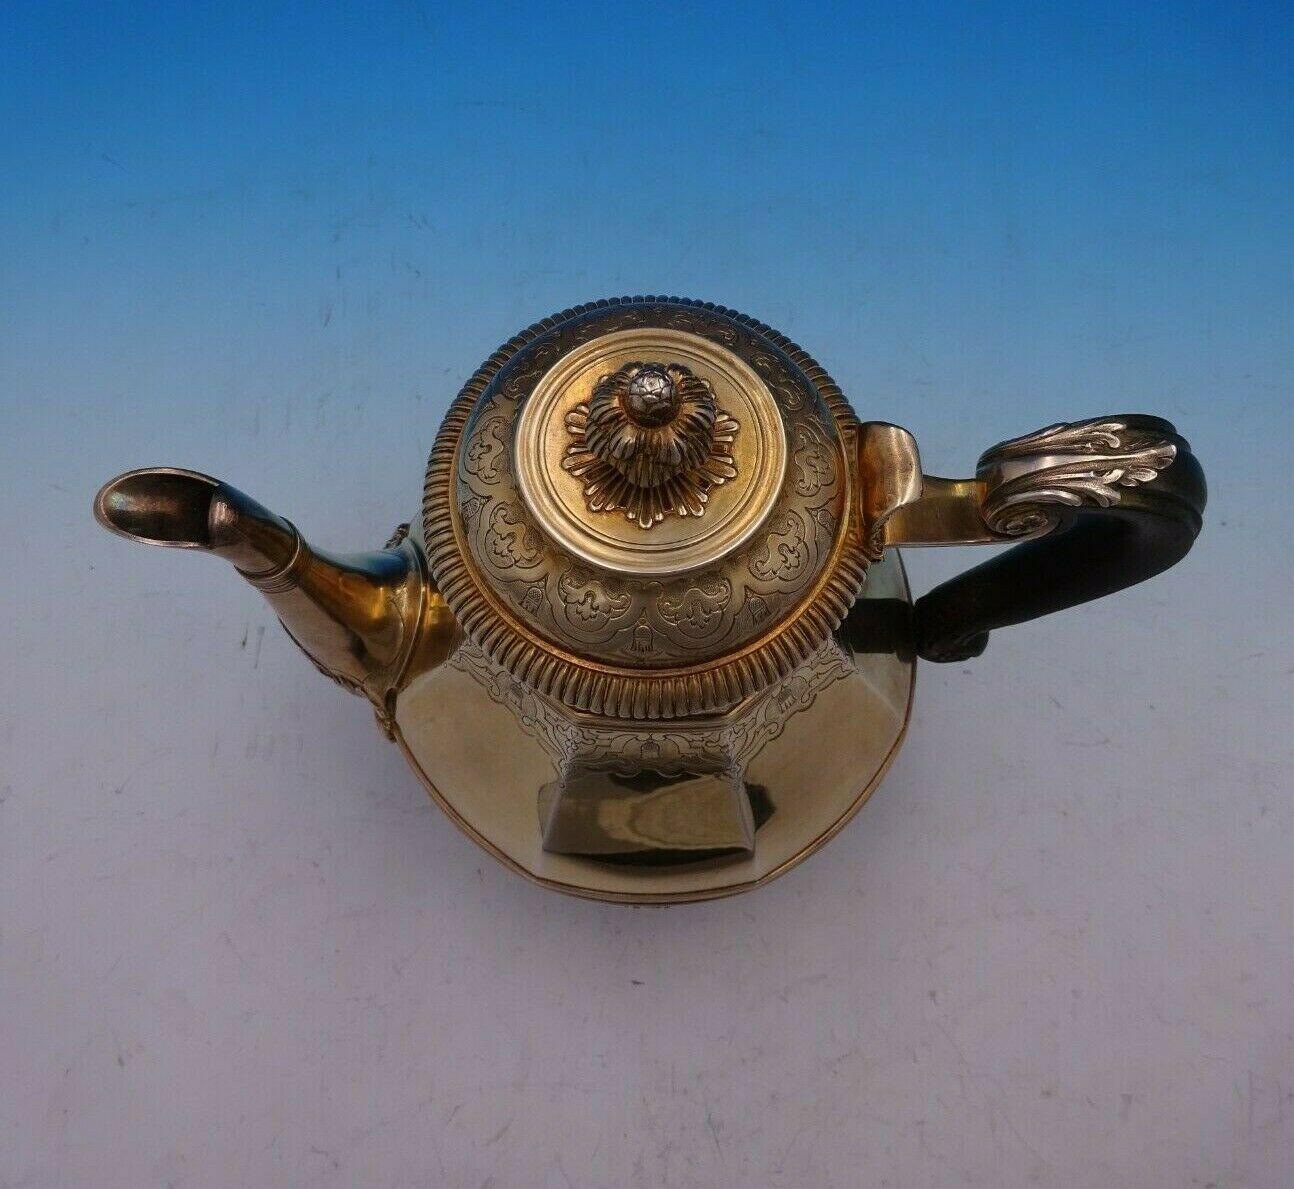 Cardeilhac

Stunning Cardeilhac Paris French .950 silver vermeil tea pot with ebony handle. This piece features a wide base of raised cattails and design. There is a large figural Grecian woman at the base of the spout, as well as three wide bands